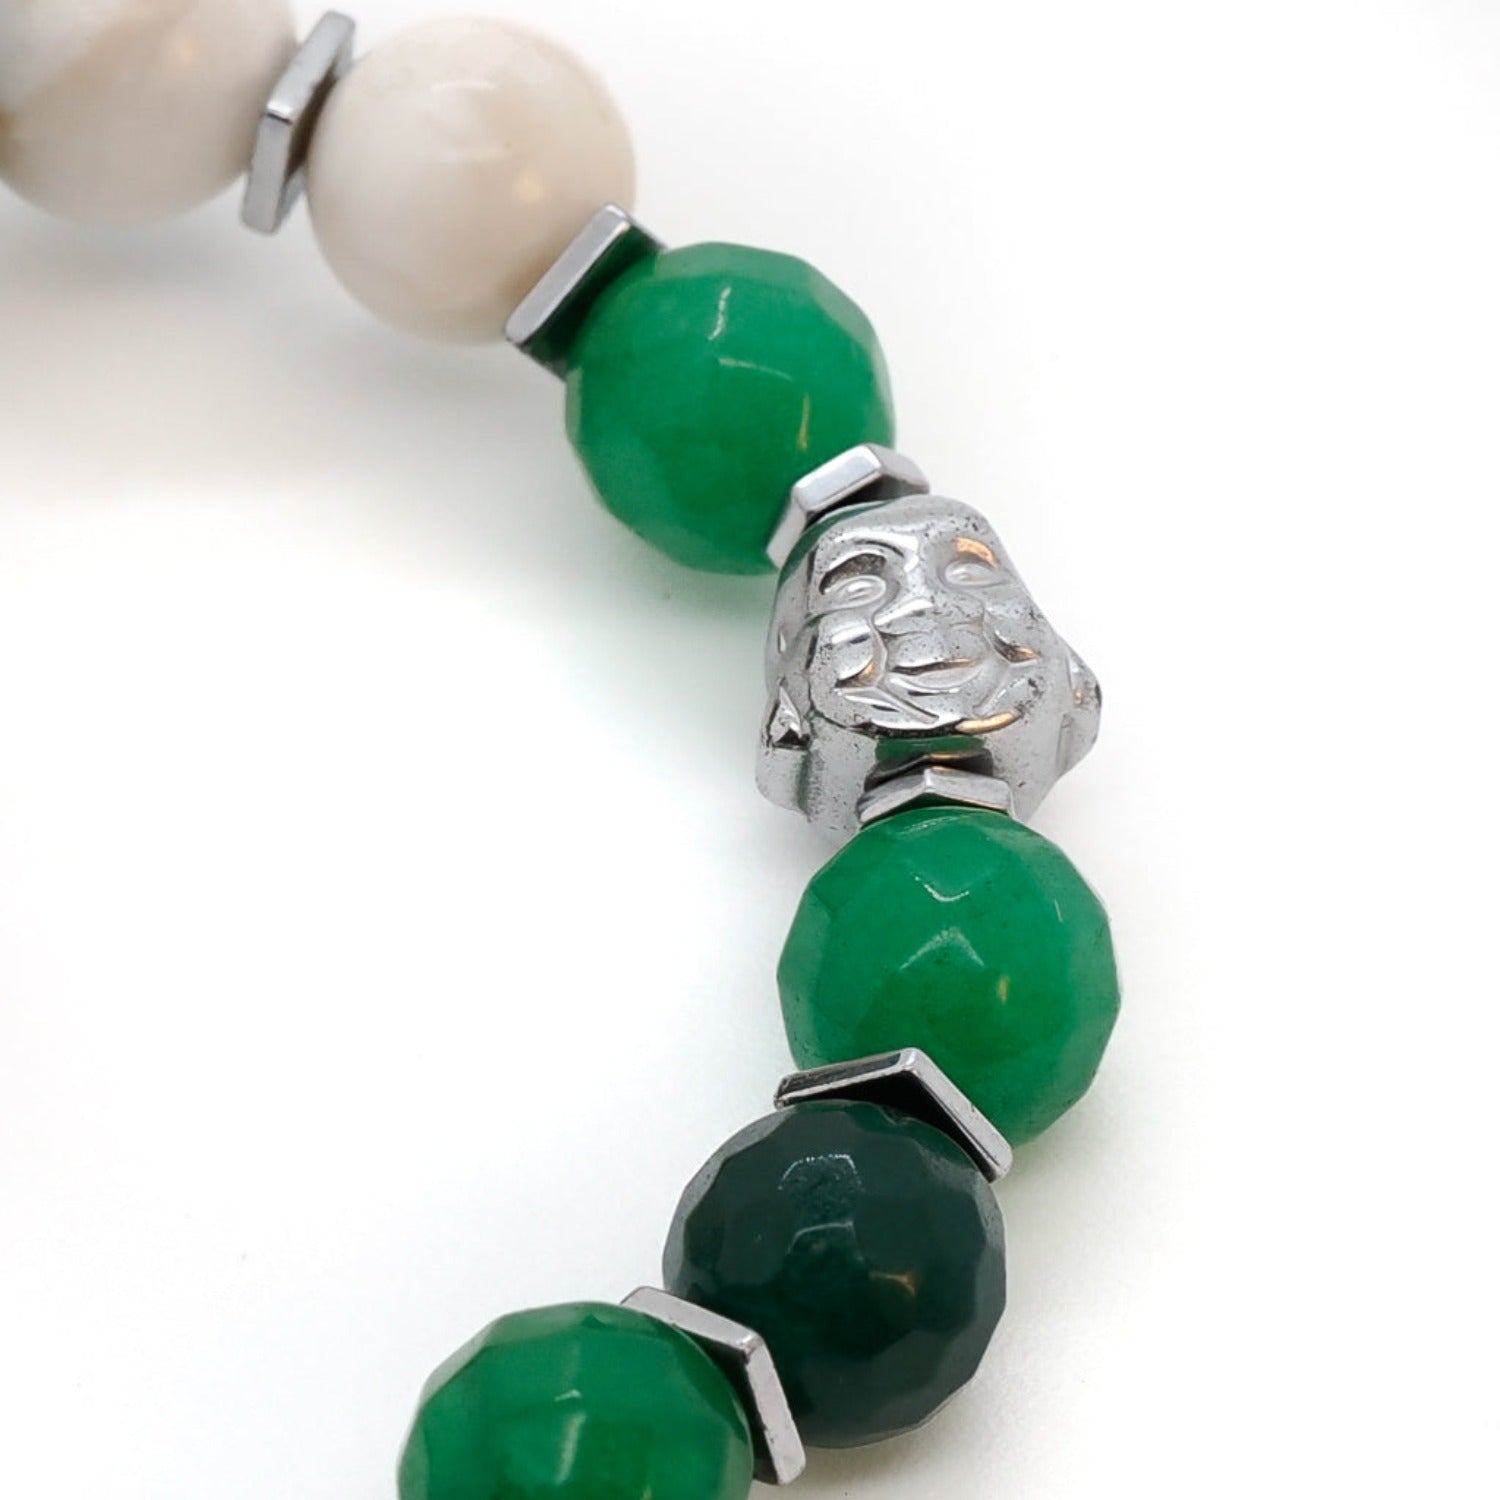 Green Buddha Bracelet adorned with a striking Handmade Nepal Green bead, African green glass bead, and silver color Hematite spacers, creating a harmonious blend of cultural inspiration and natural materials.